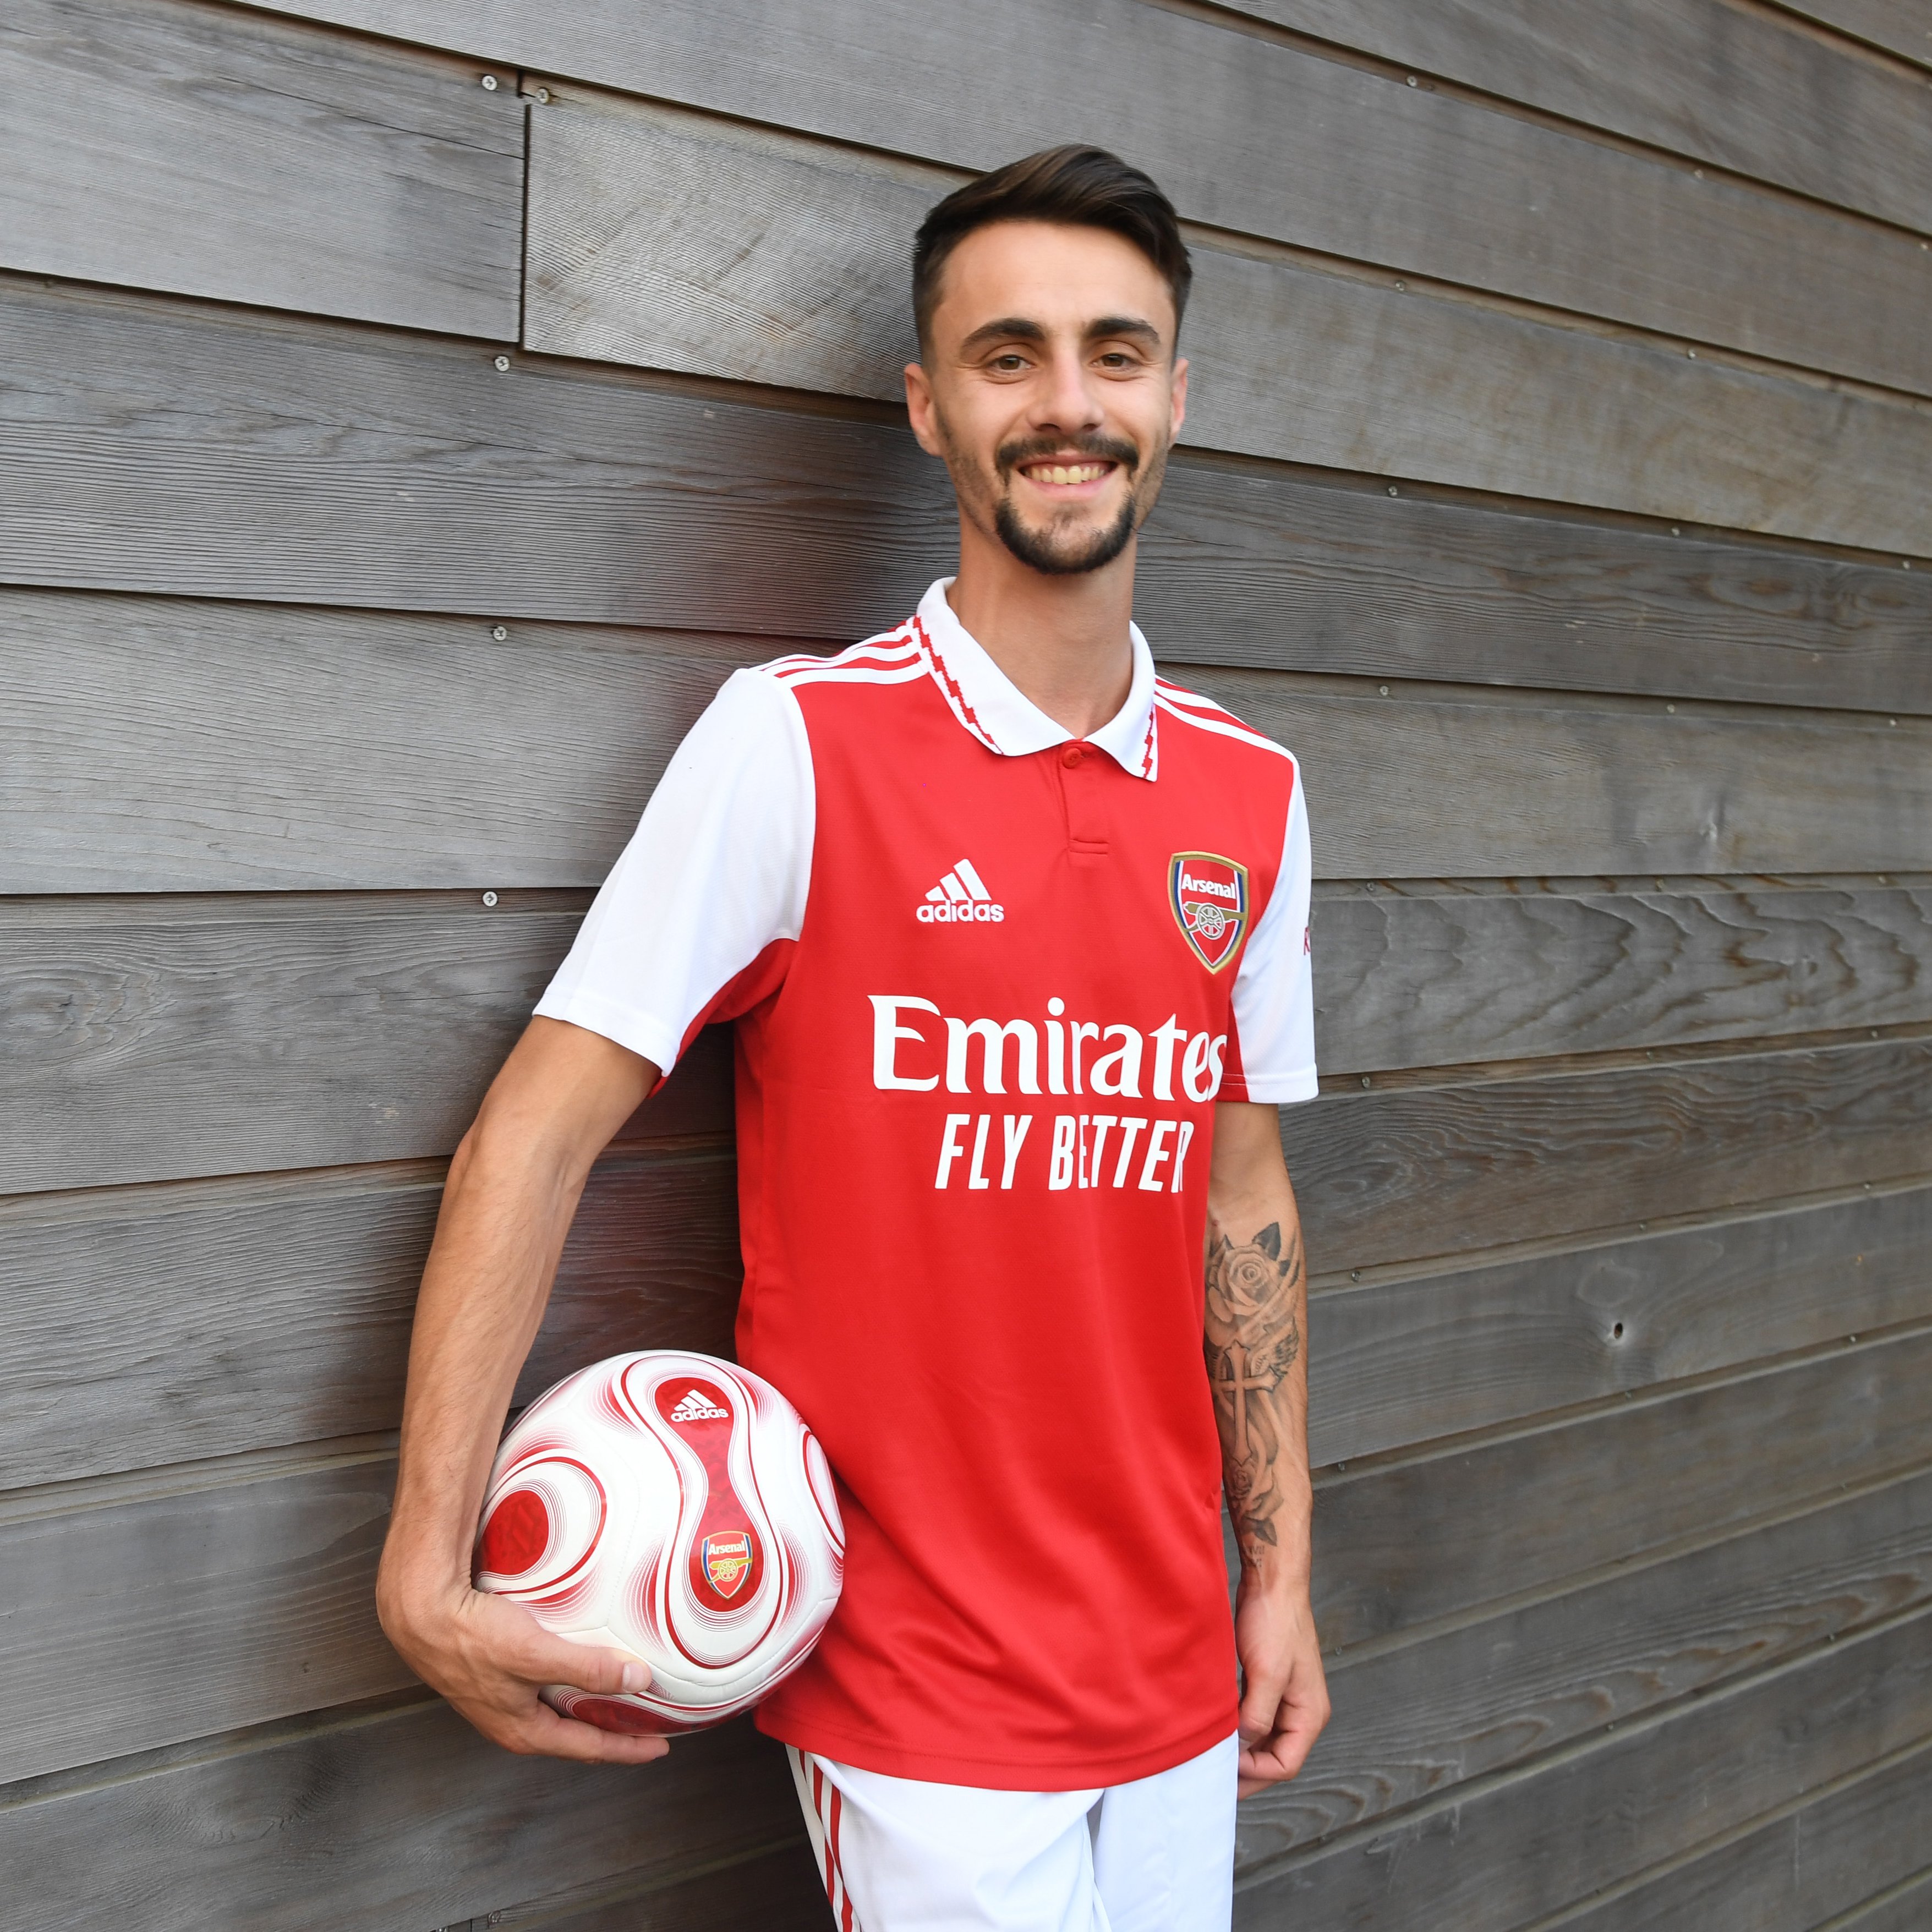 Premier League Transfers: Arsenal submit an OFFICIAL offer for Brazilian winger Raphinha, Leeds United to reject bid - Check out